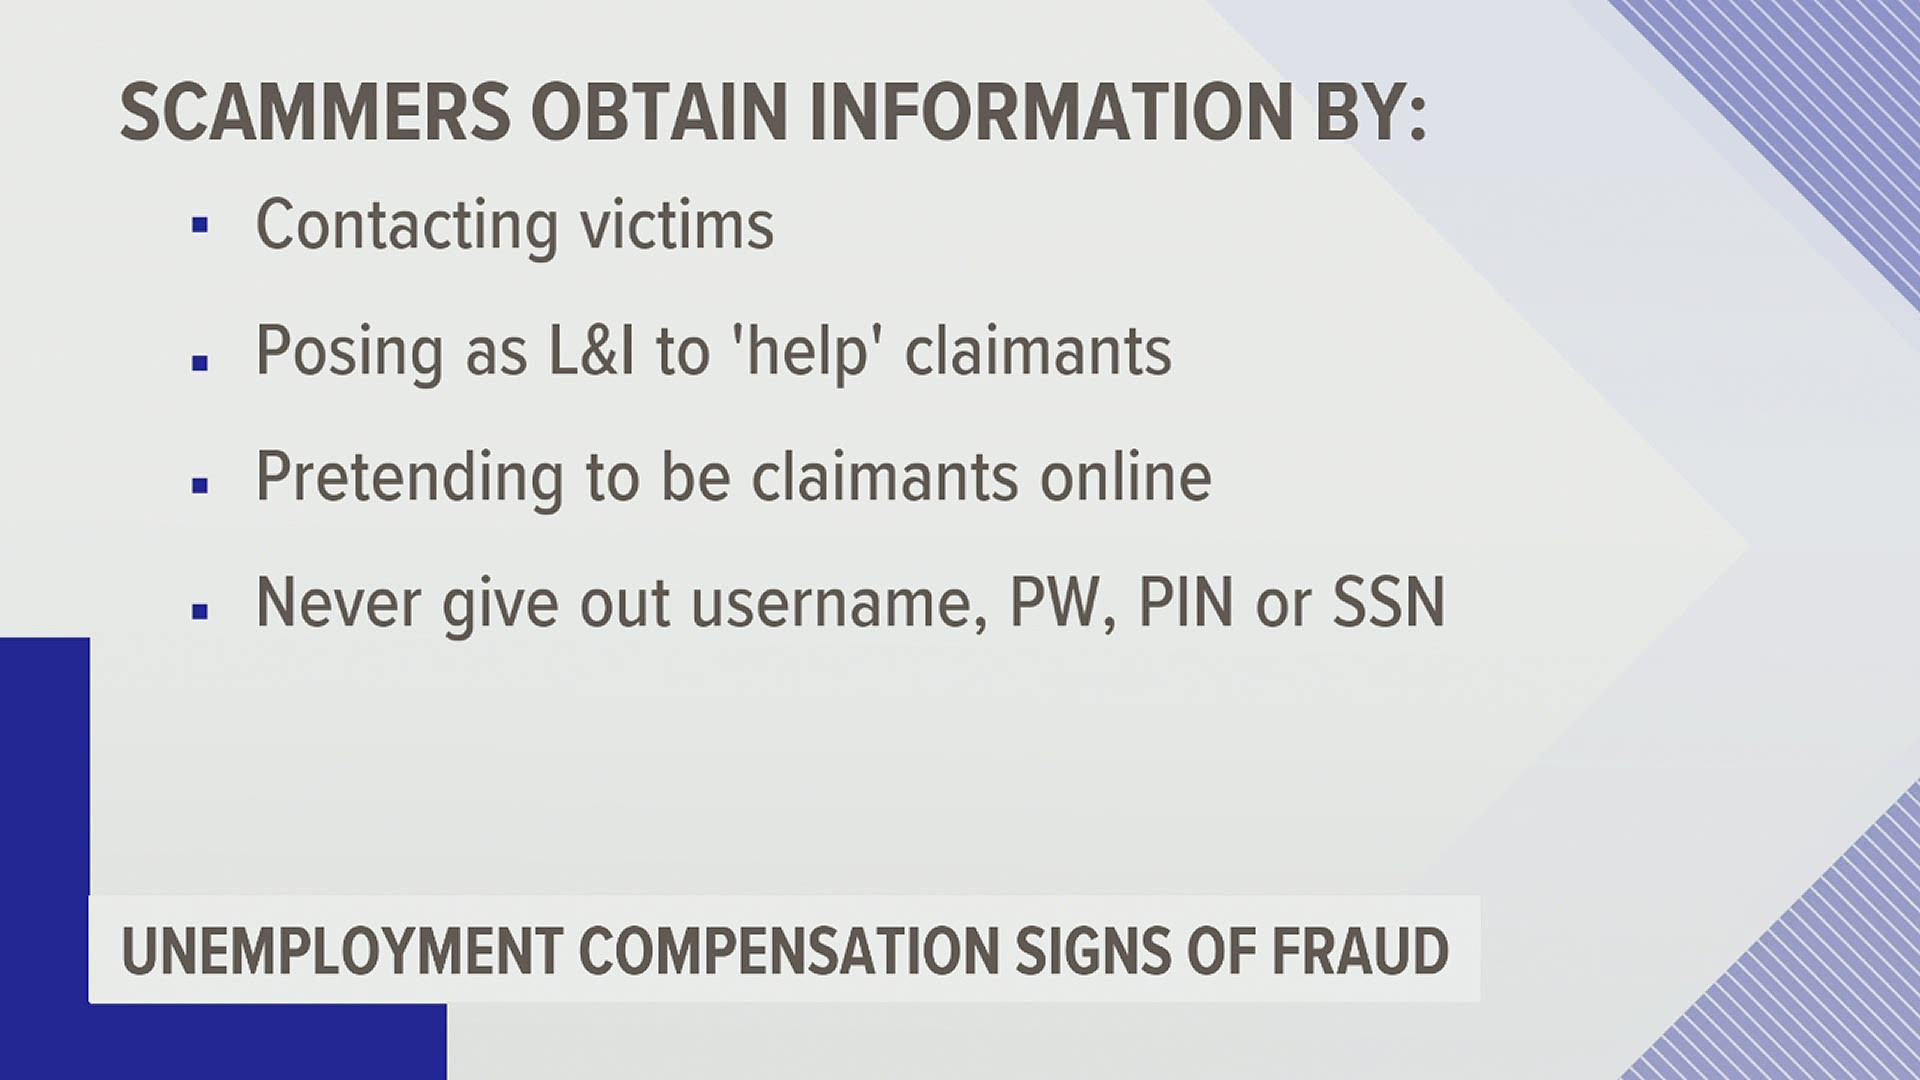 The scammers are obtaining personal information of Pennsylvanians through social media to file fraudulent benefit claims, or redirect payments to themselves.